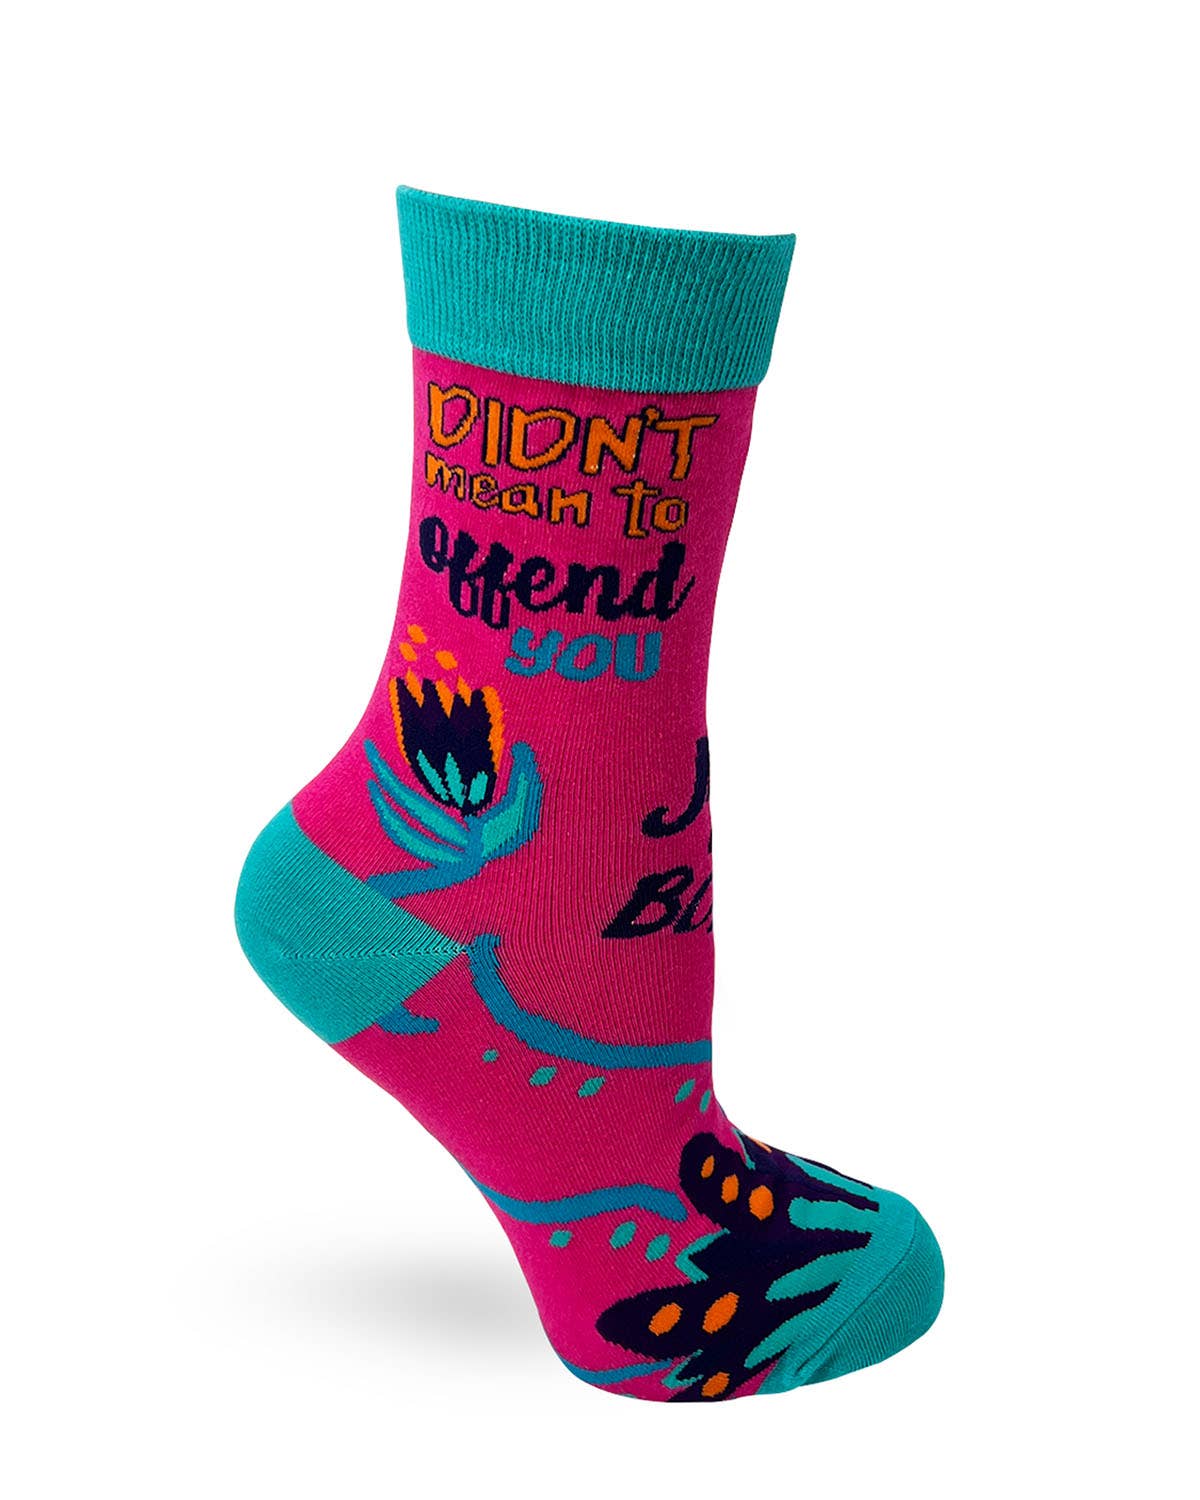 Didn't Mean to Offend You, it's Just a Bonus! Women's Socks